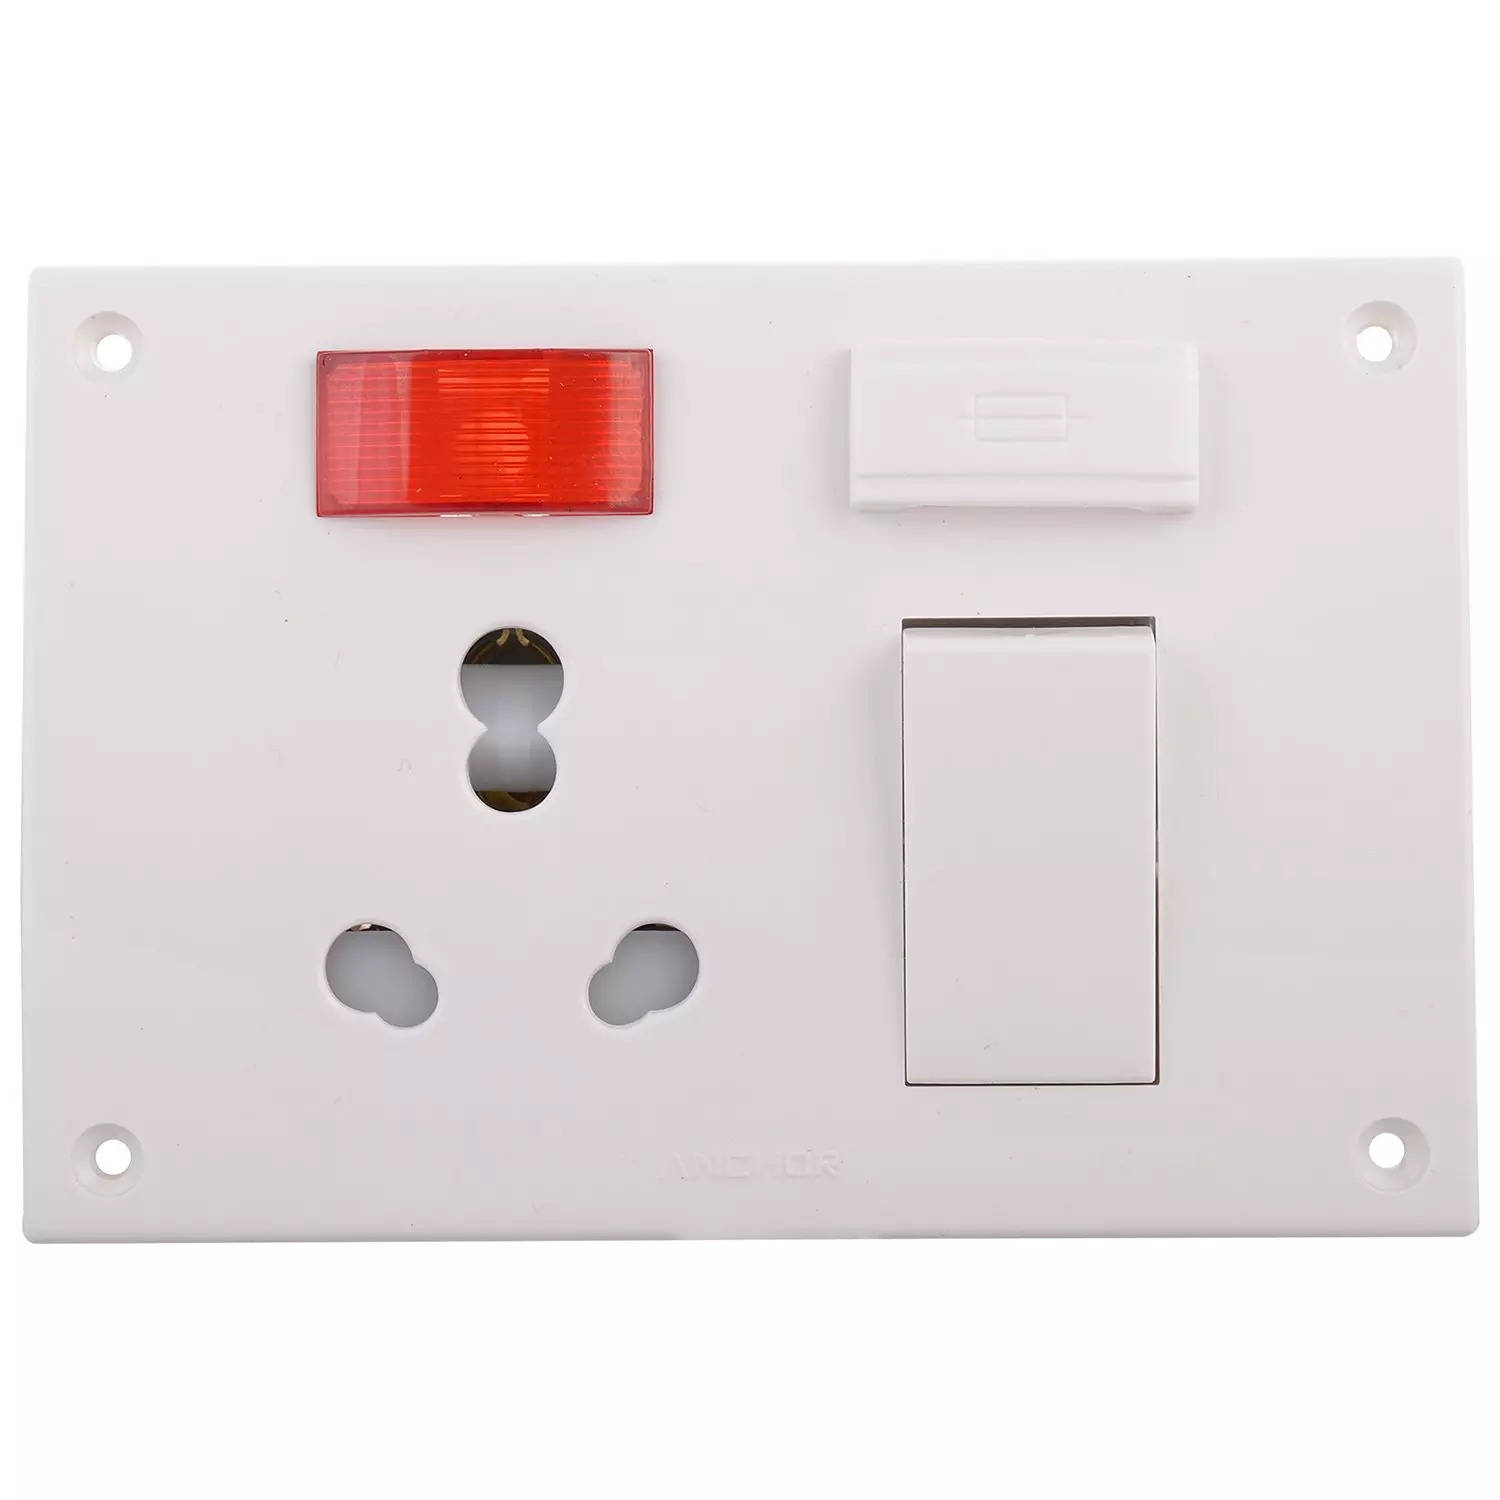 Best Anchor Sockets in India to Plug Your Electronic Appliances Safely:Image